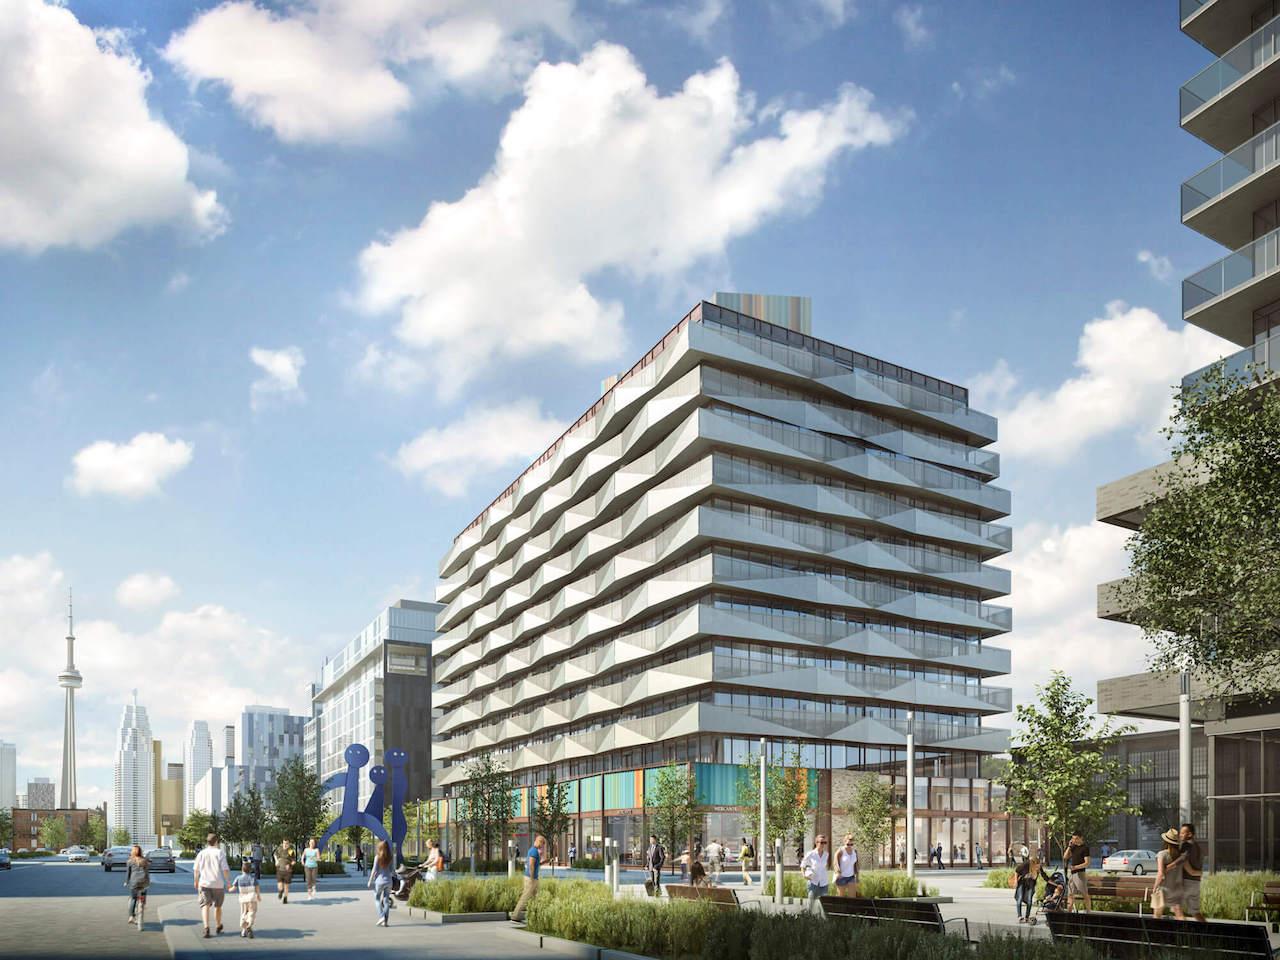 Canary Block is a new high rise condo complex by Kilmer Group located in 460 Front Street, Toronto, Ontario.